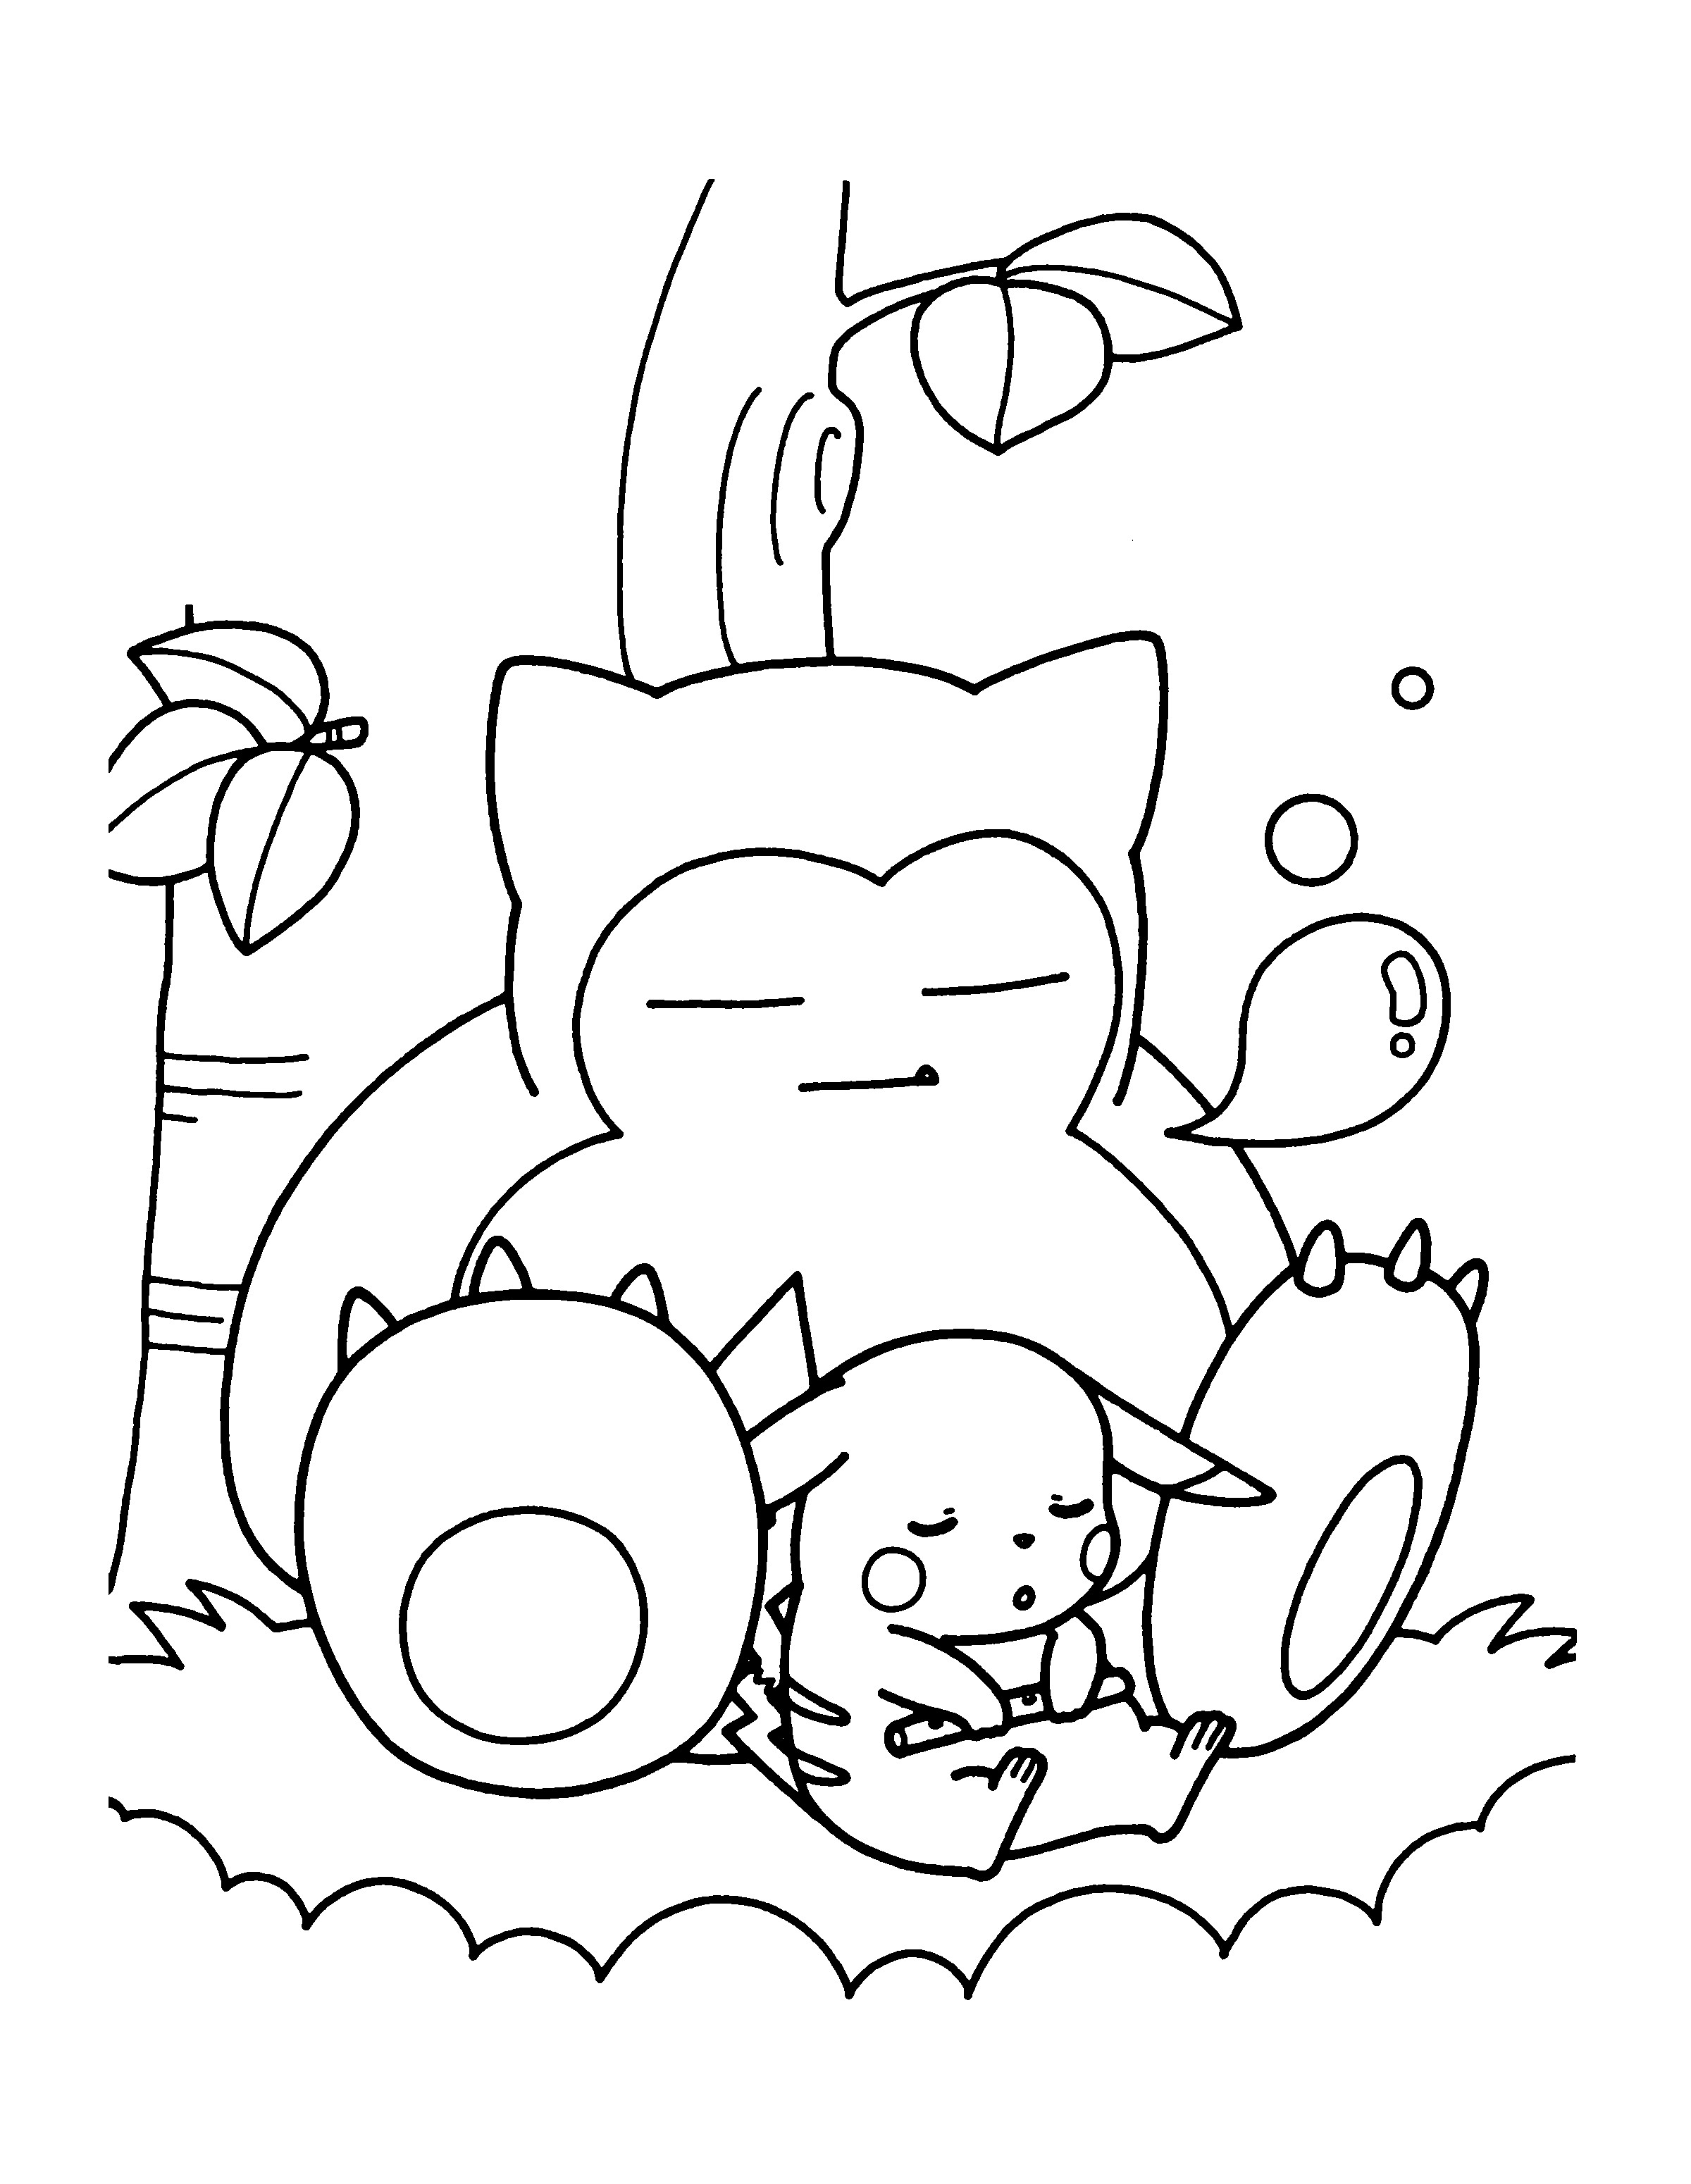 Pokemon coloring pages More